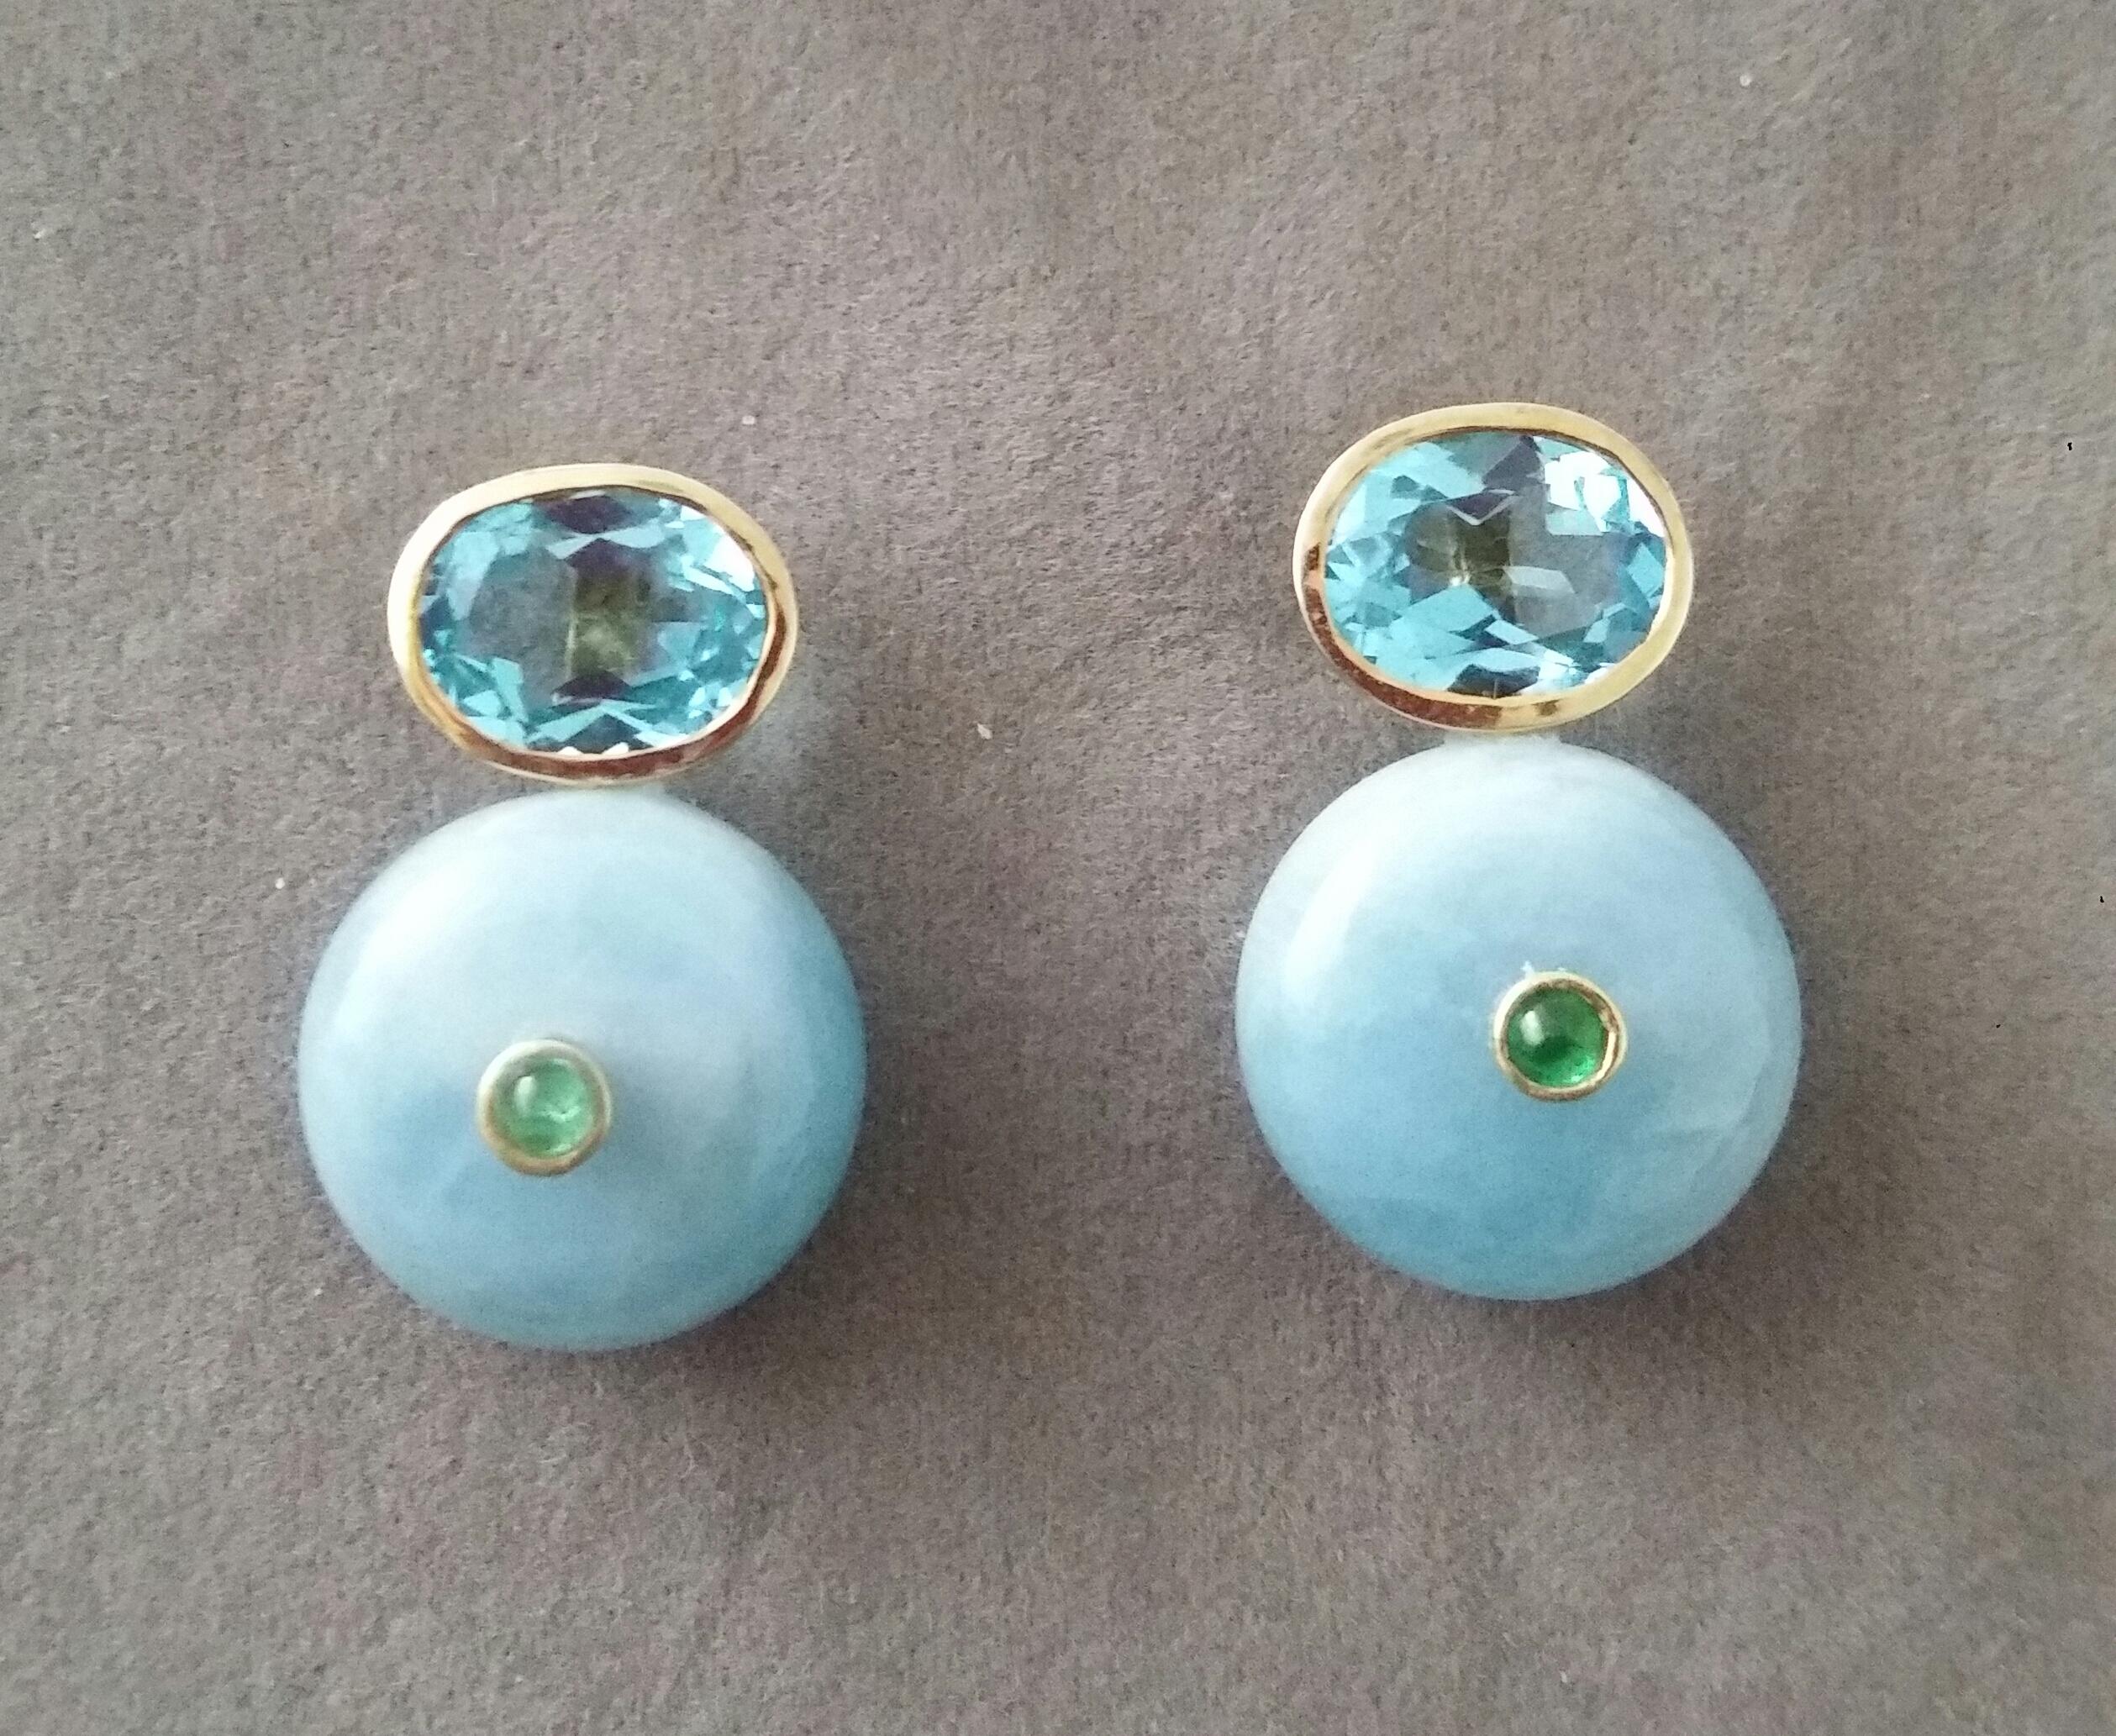 Simple chic stud earrings with a pair of Oval Cut Blue Topaz measuring 8mm x10 mm set in solid 14 Kt. yellow gold on the top and in the lower parts 2 Round Plain Wheel Shape Aquamarine  16 mm .in diameter with a small round Emerald cab in the